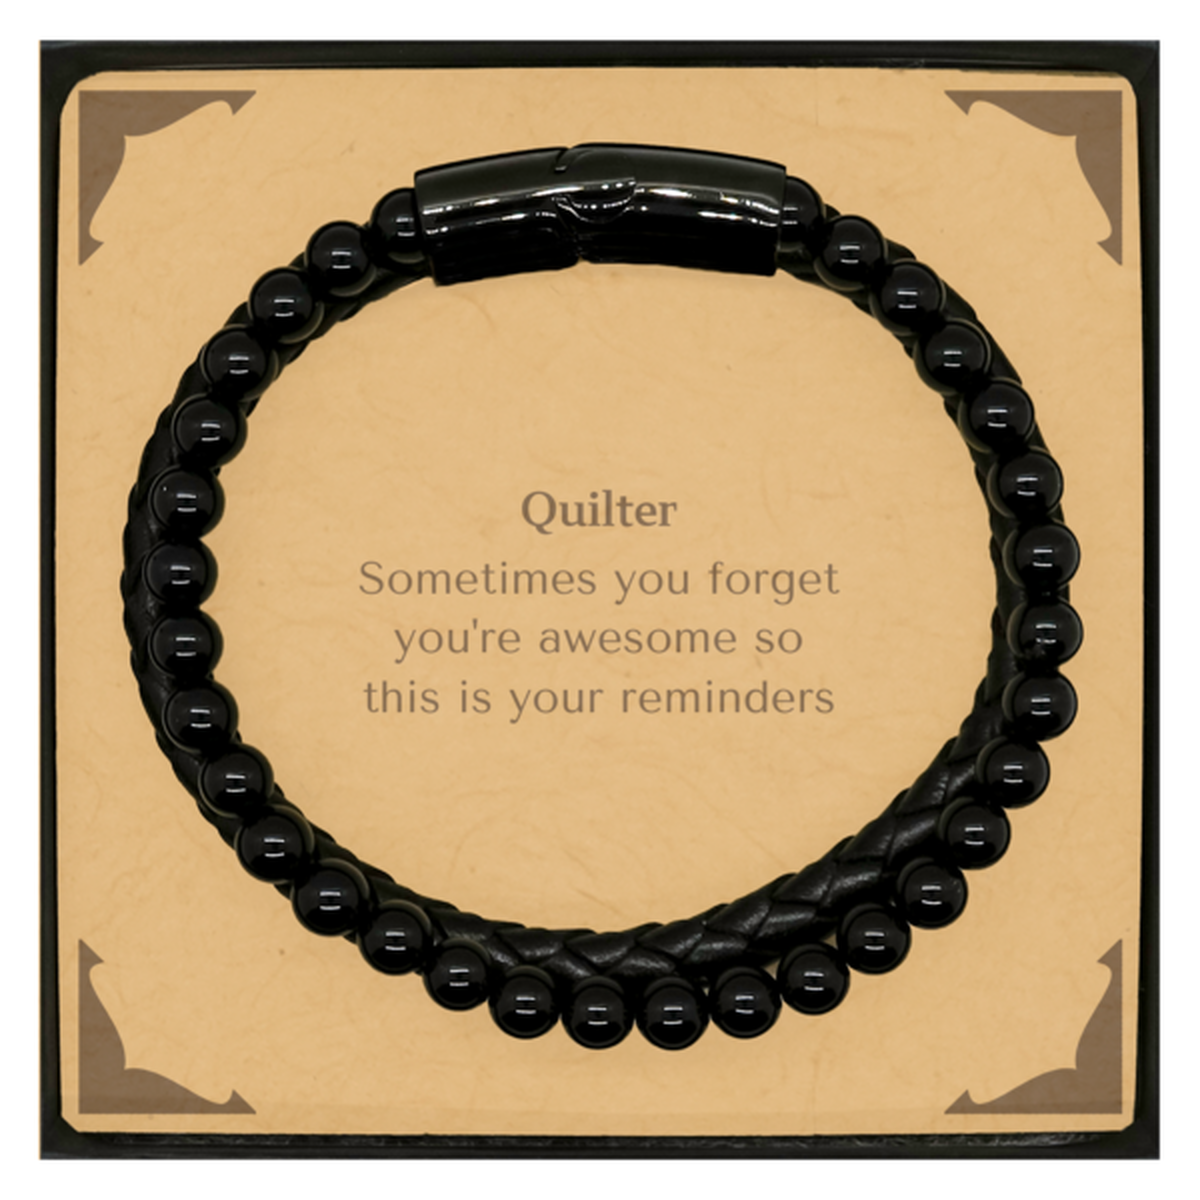 Sentimental Quilter Stone Leather Bracelets, Quilter Sometimes you forget you're awesome so this is your reminders, Graduation Christmas Birthday Gifts for Quilter, Men, Women, Coworkers